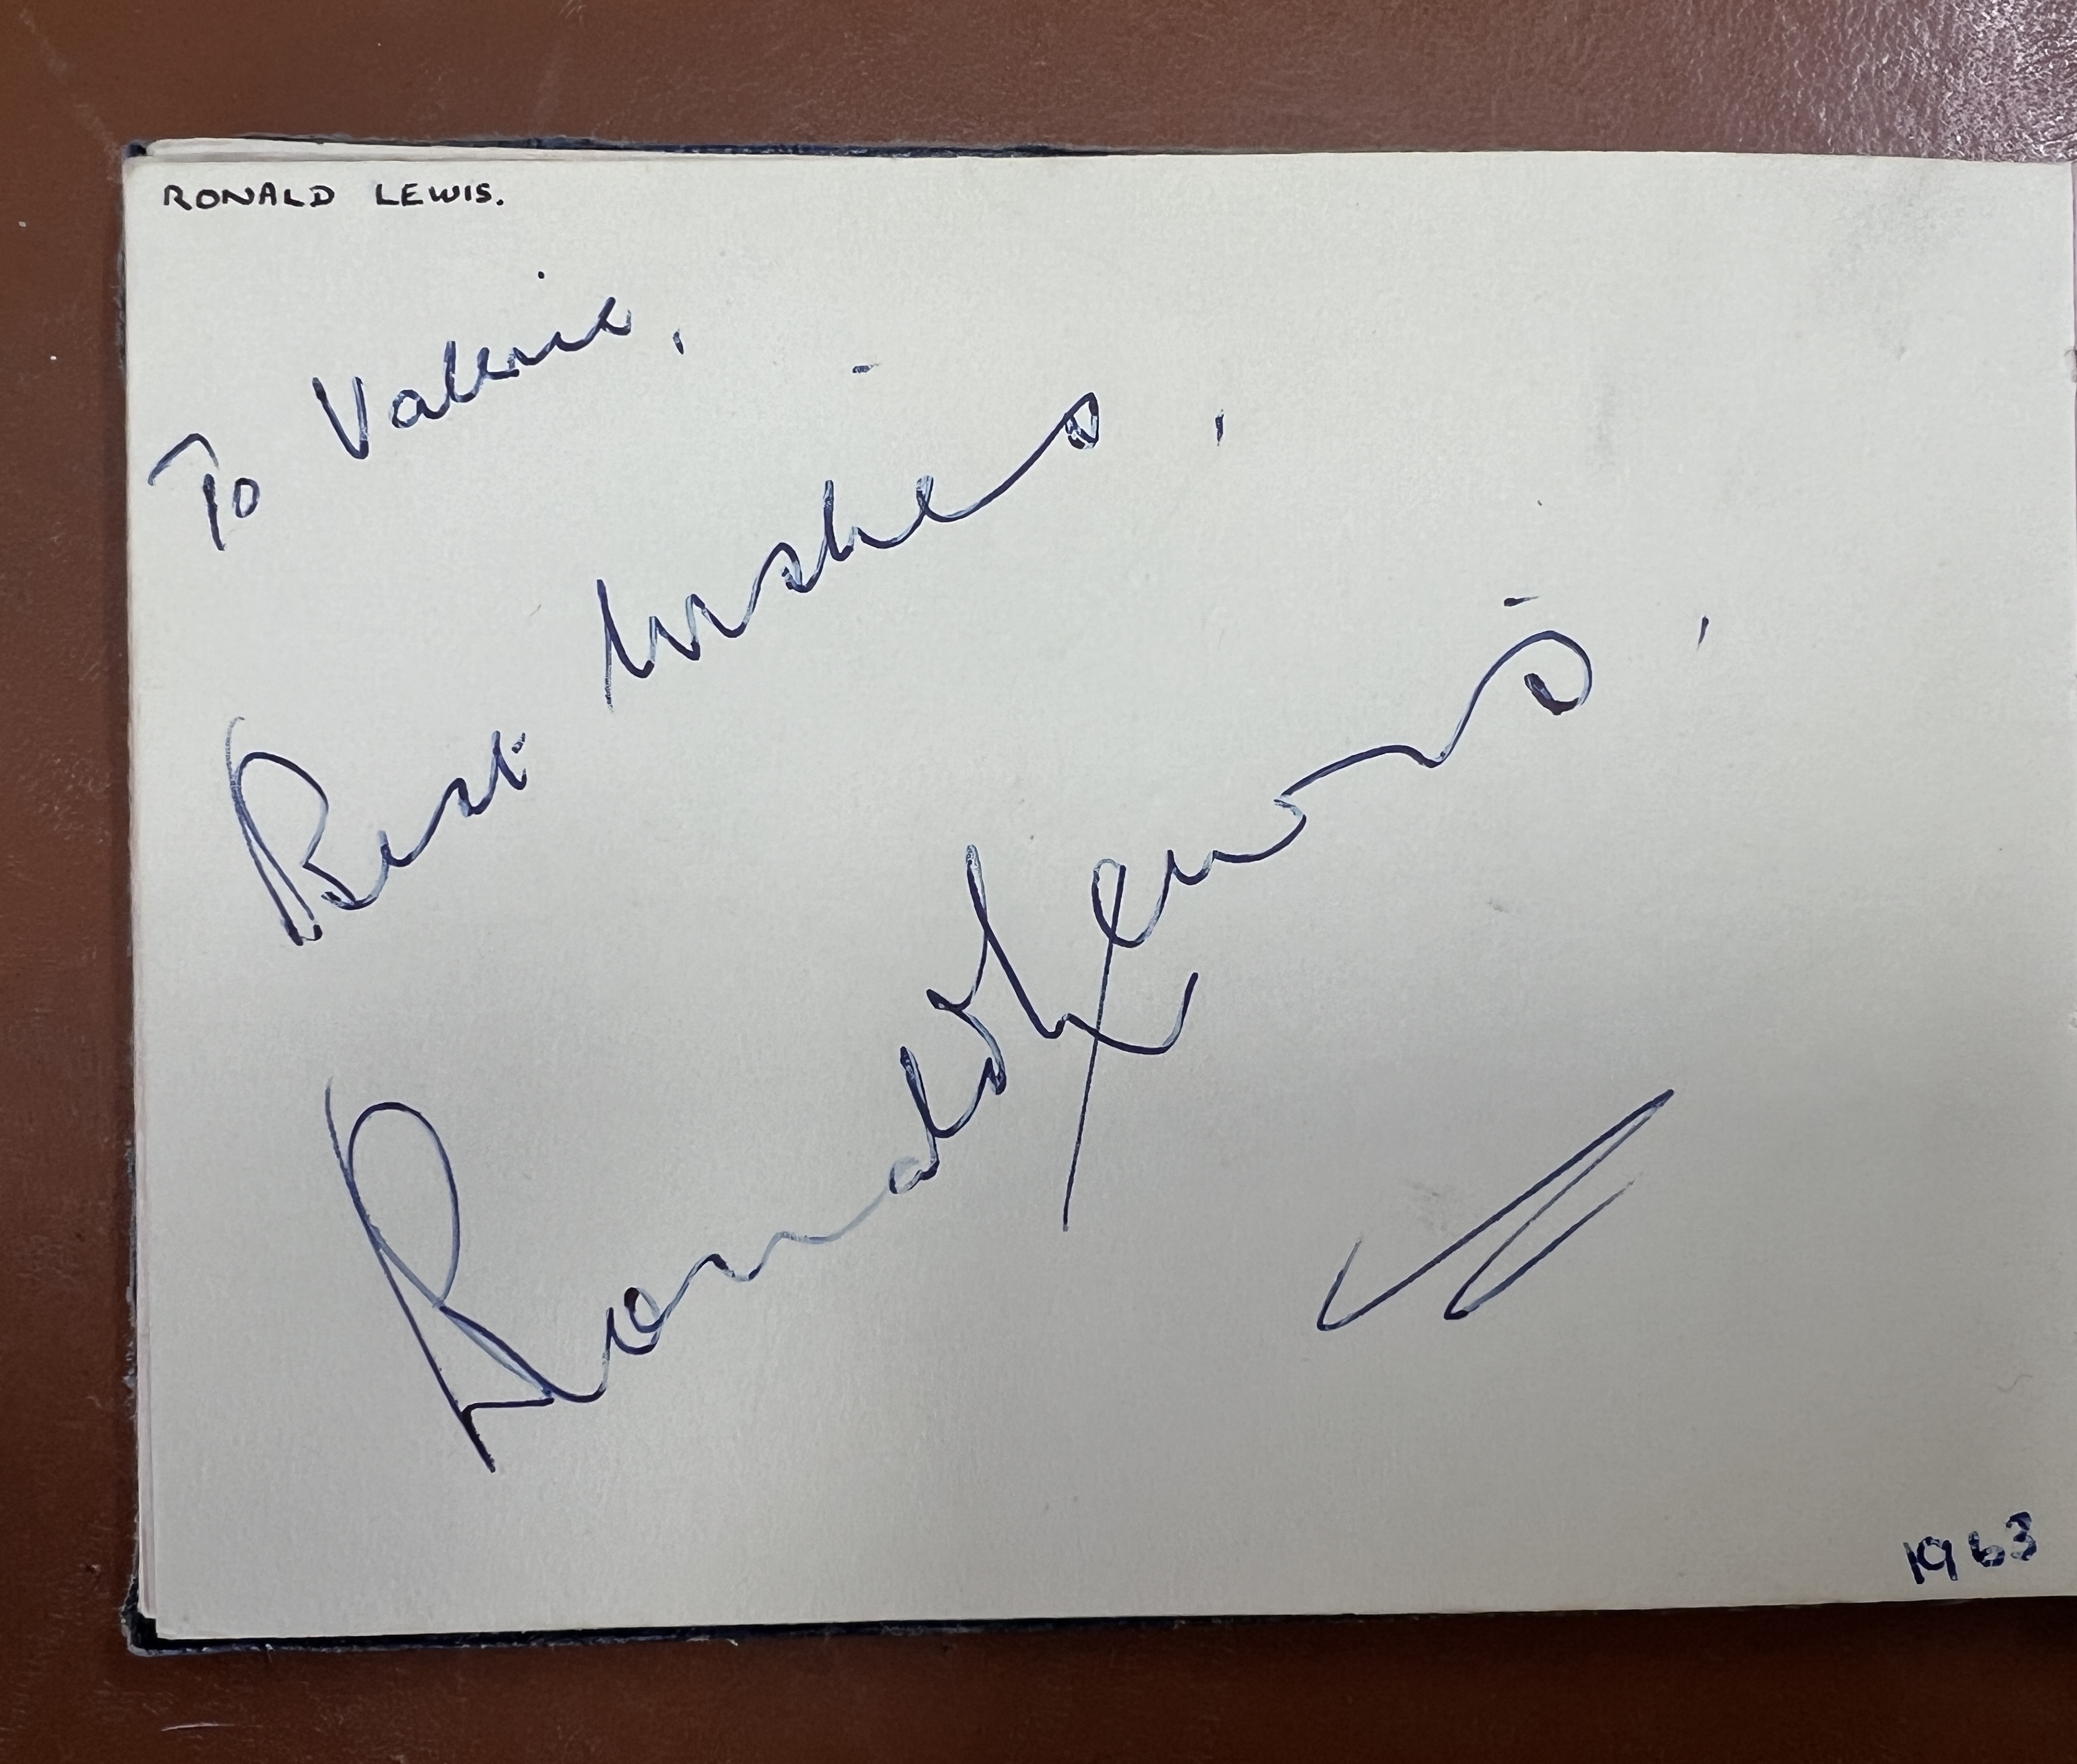 A 1960's autograph album containing autographs of various celebrities including Cliff Richard - Image 17 of 37